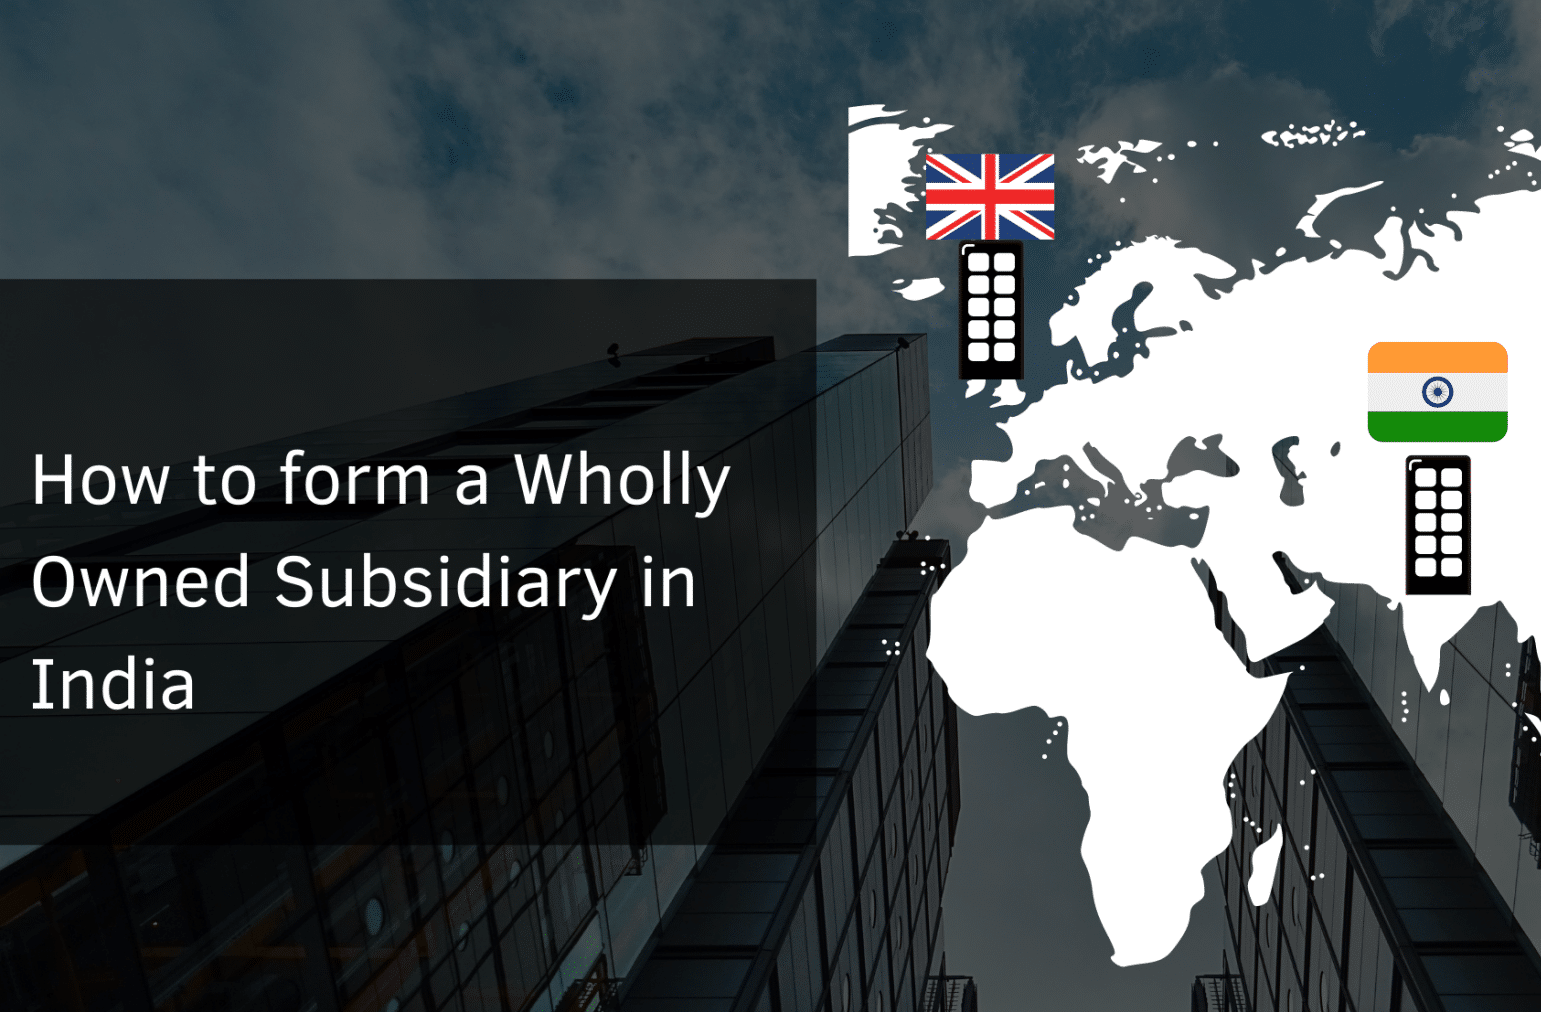 How to form a Wholly Owned Subsidiary in India